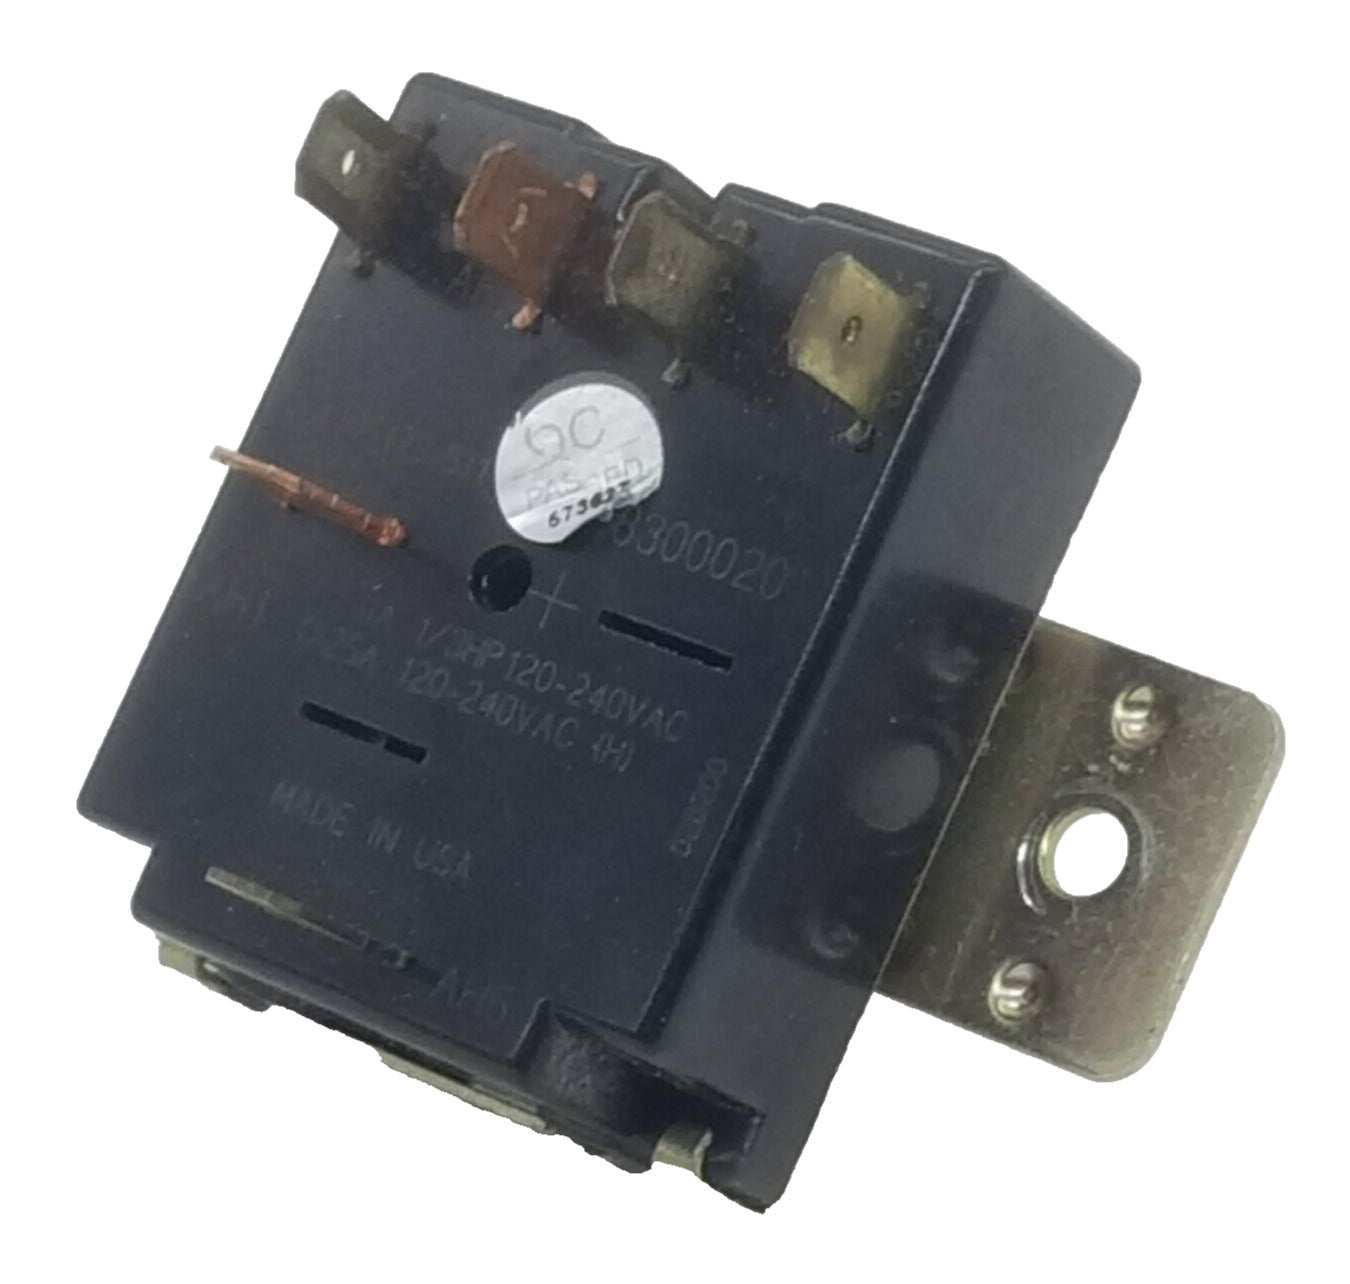 OEM Replacement for Whirlpool Dryer Temperature Switch 8300020